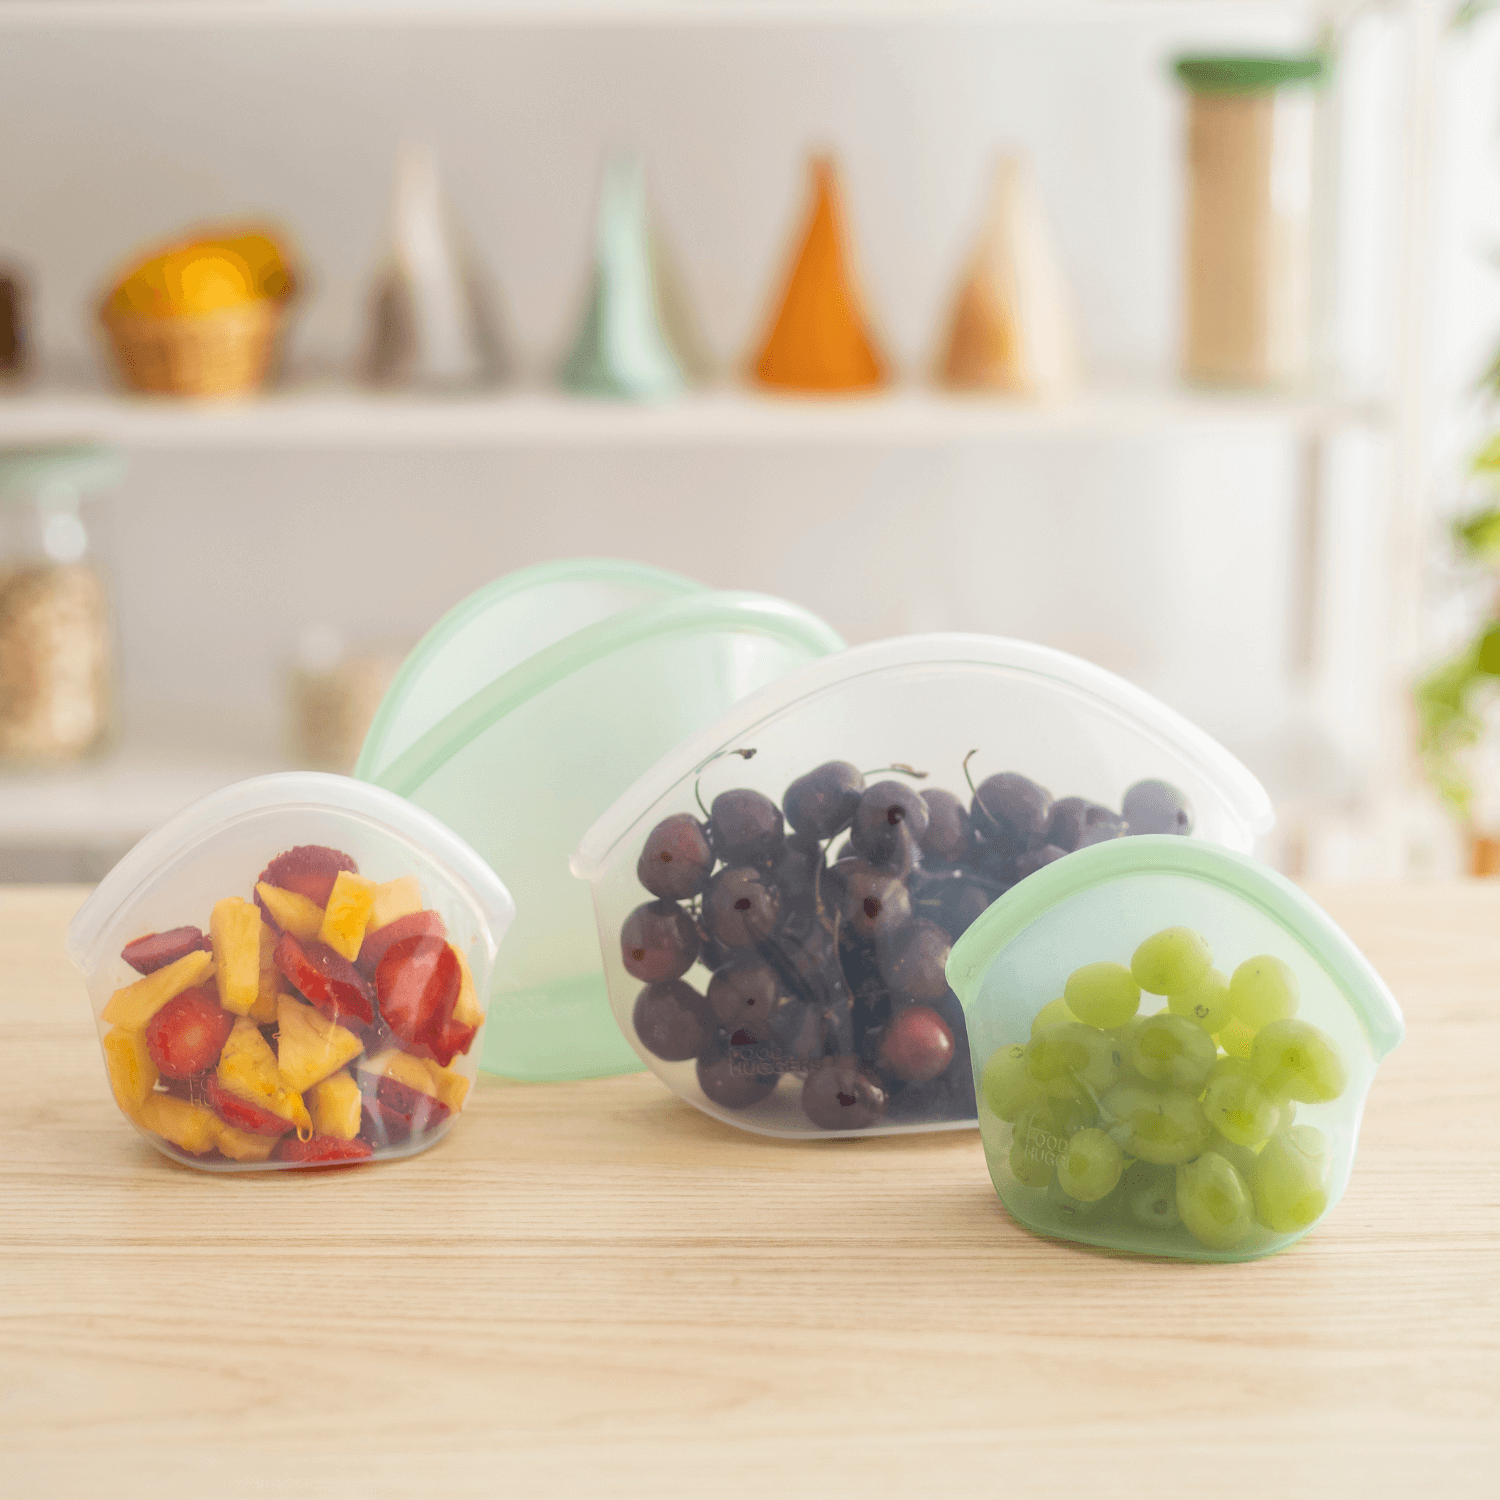 "Four BPA free silicone bags on a table, three contain fruit and one is empty "